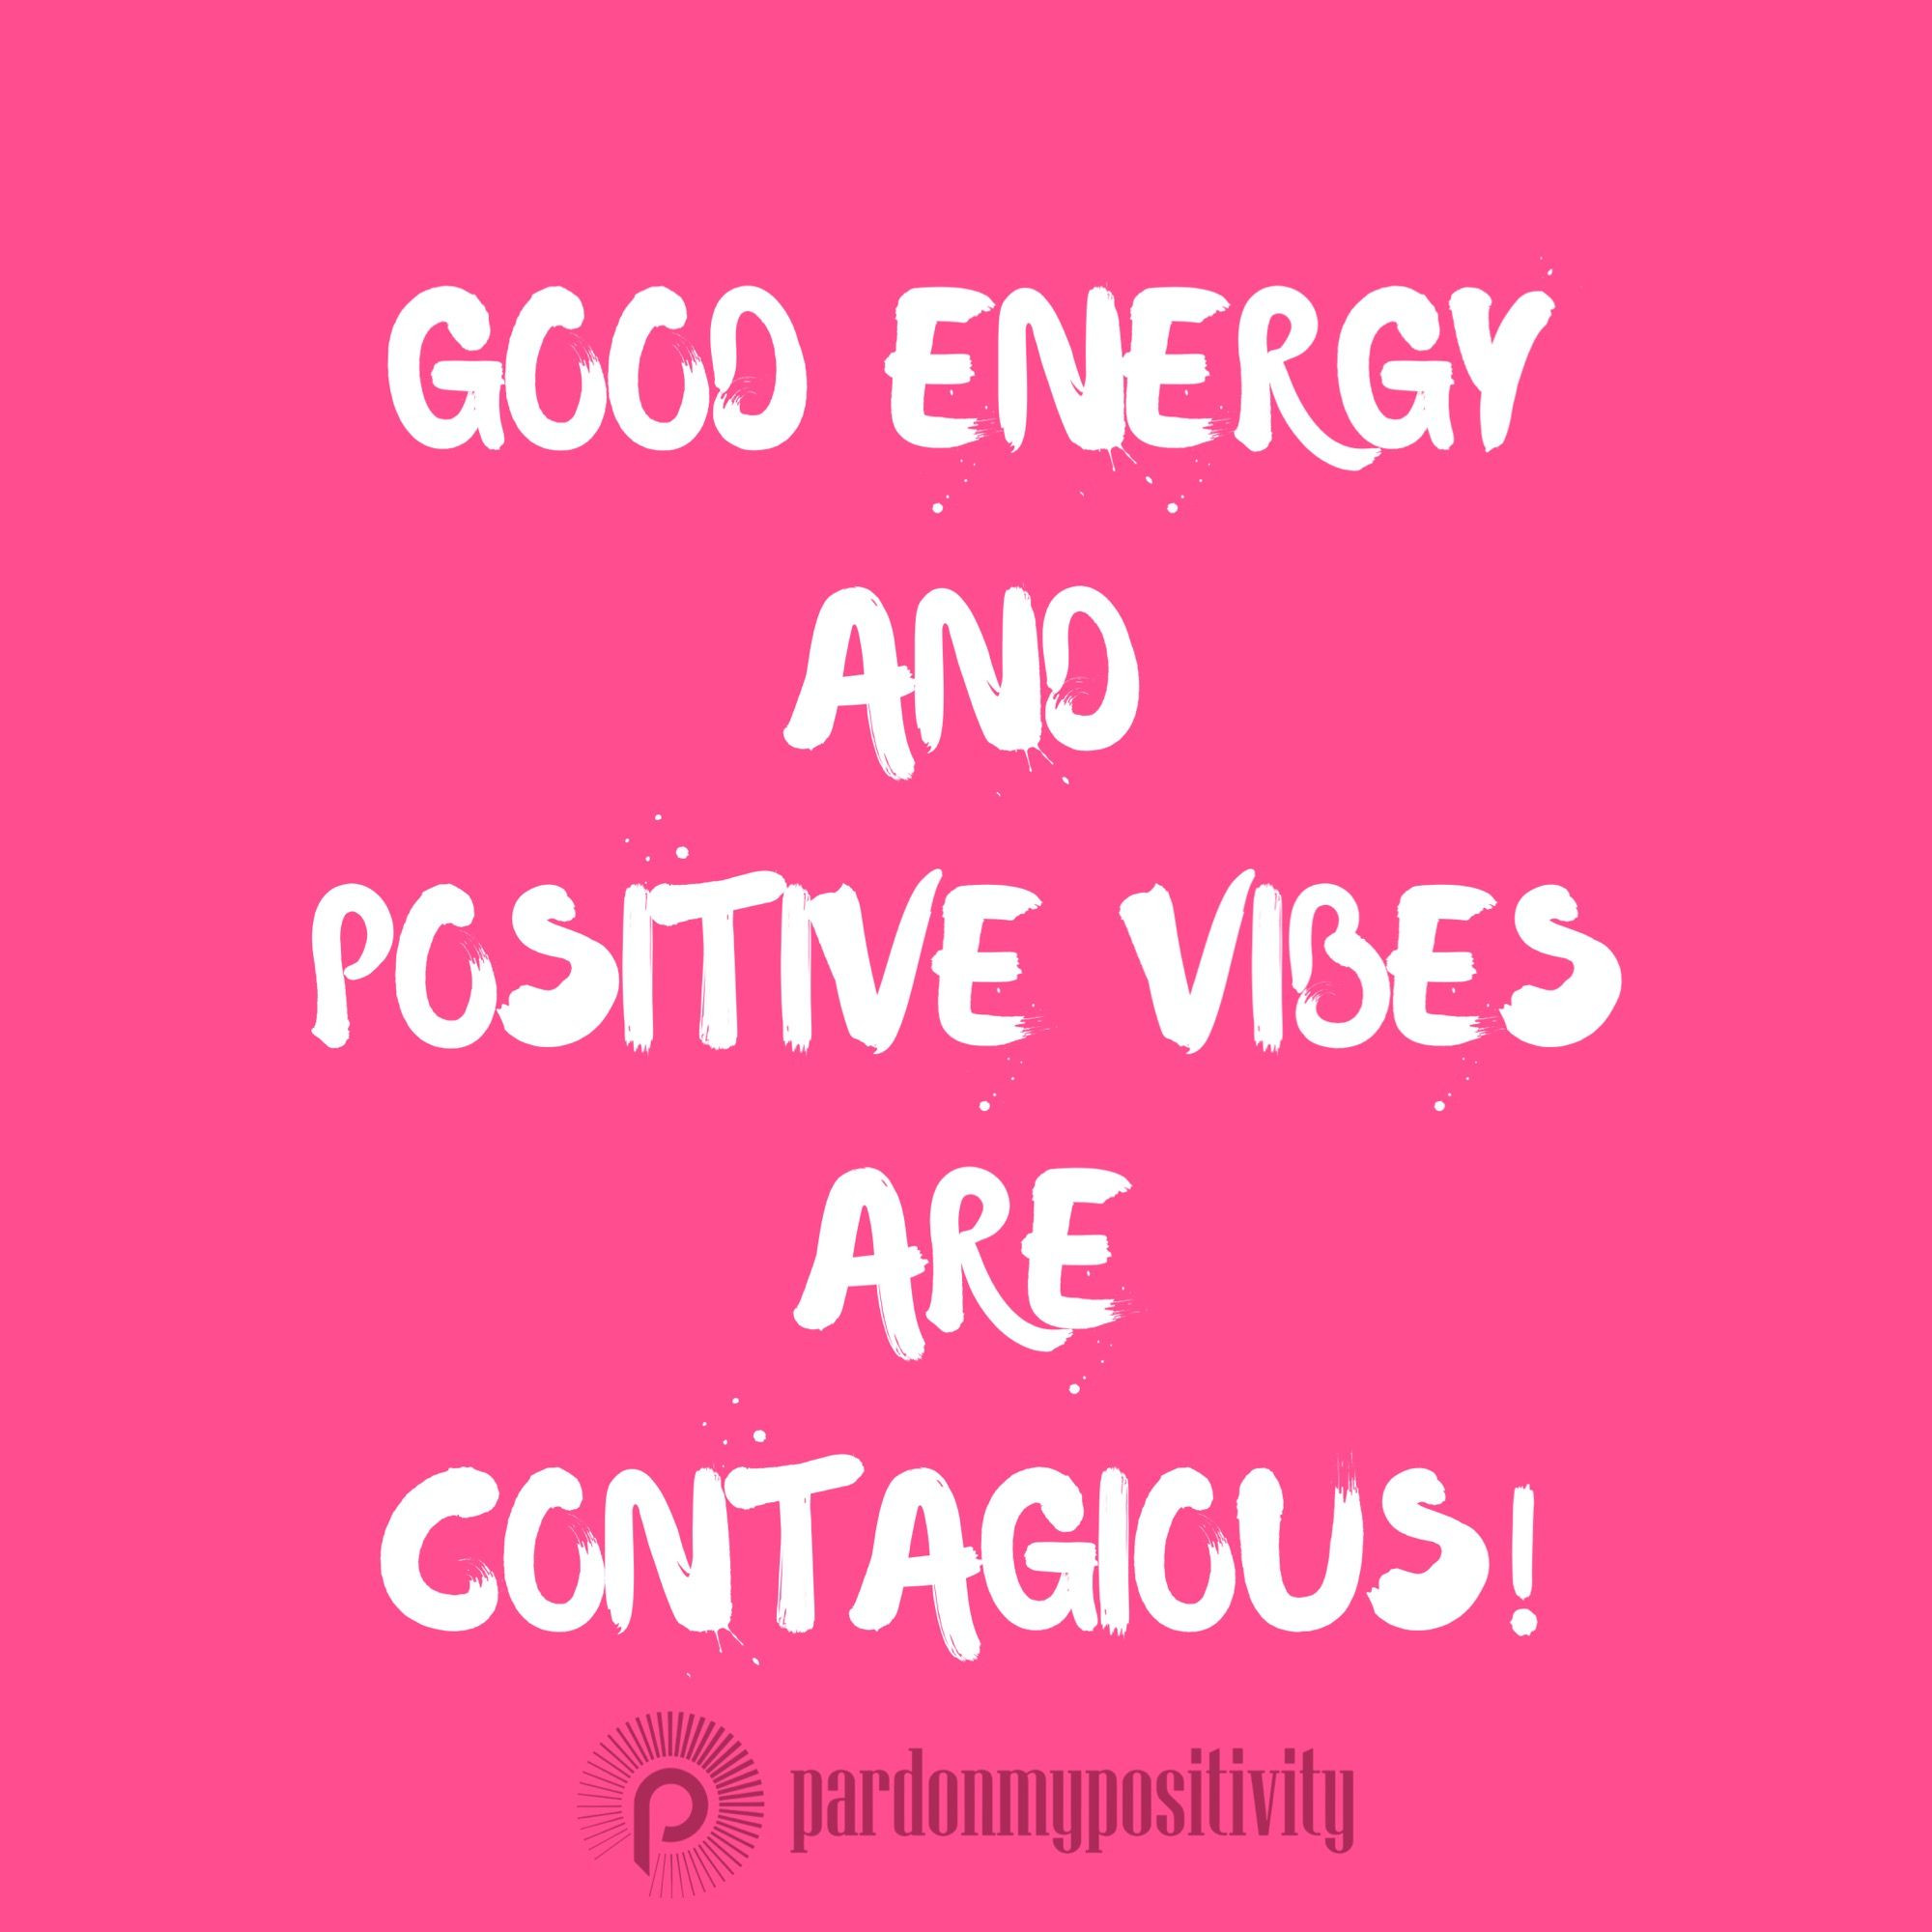 Positive Vibes Quotes
 Good energy and positive vibes are contagious quote